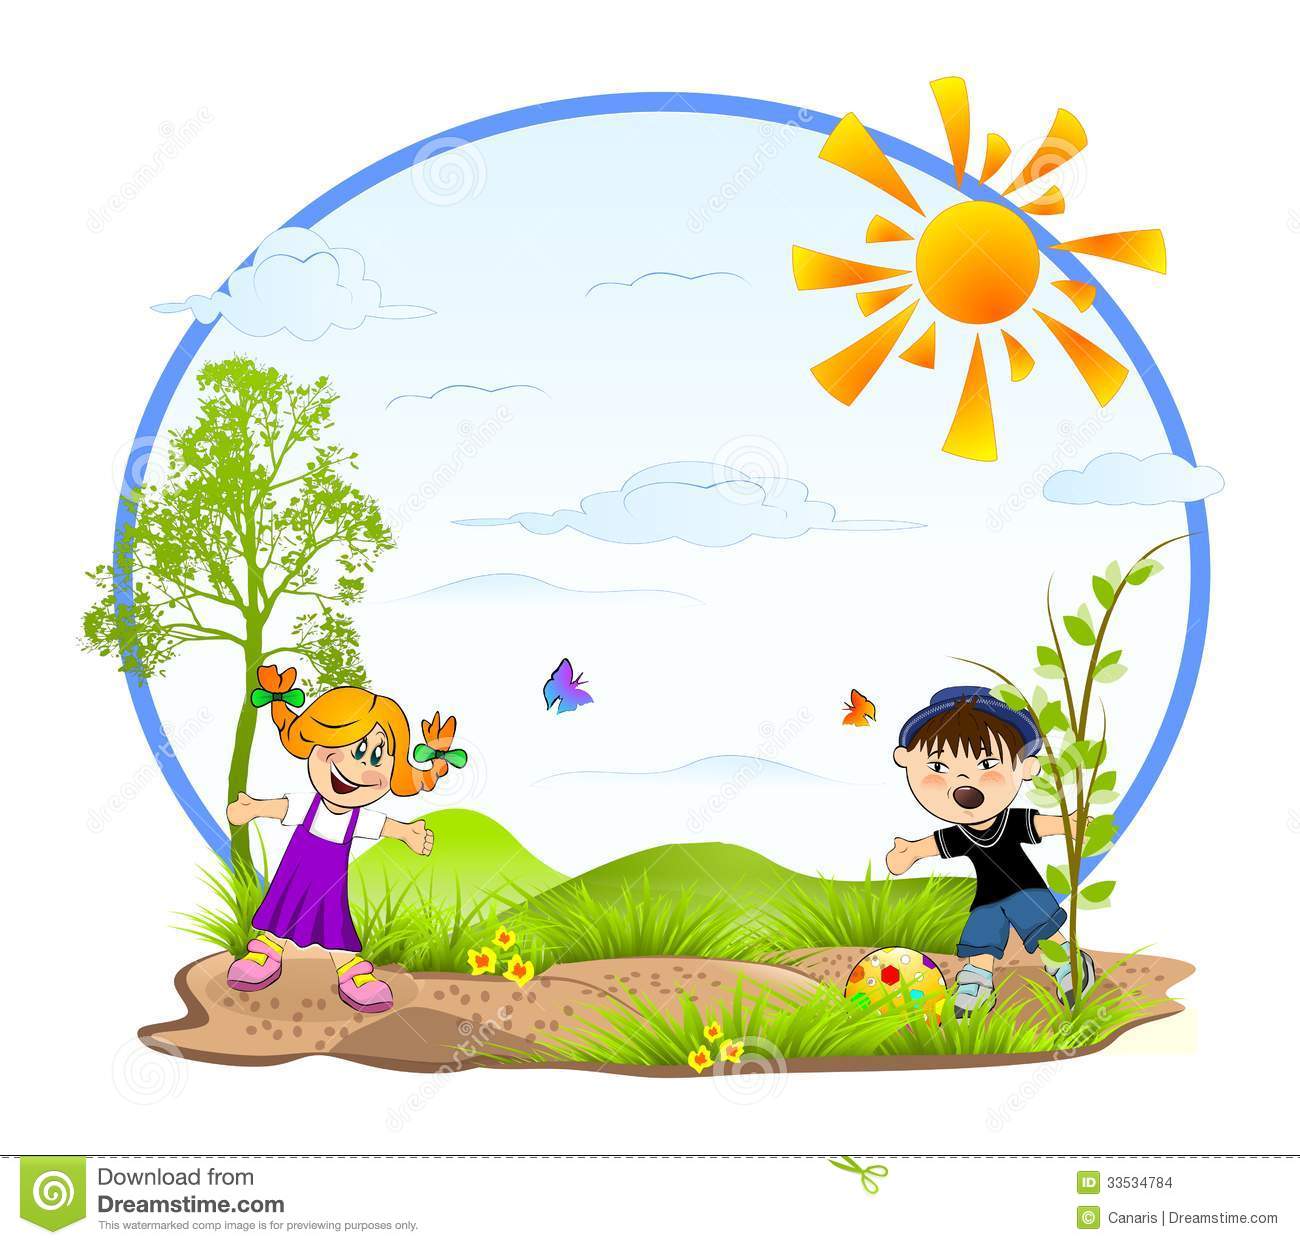 656 Sunny Day free clipart.